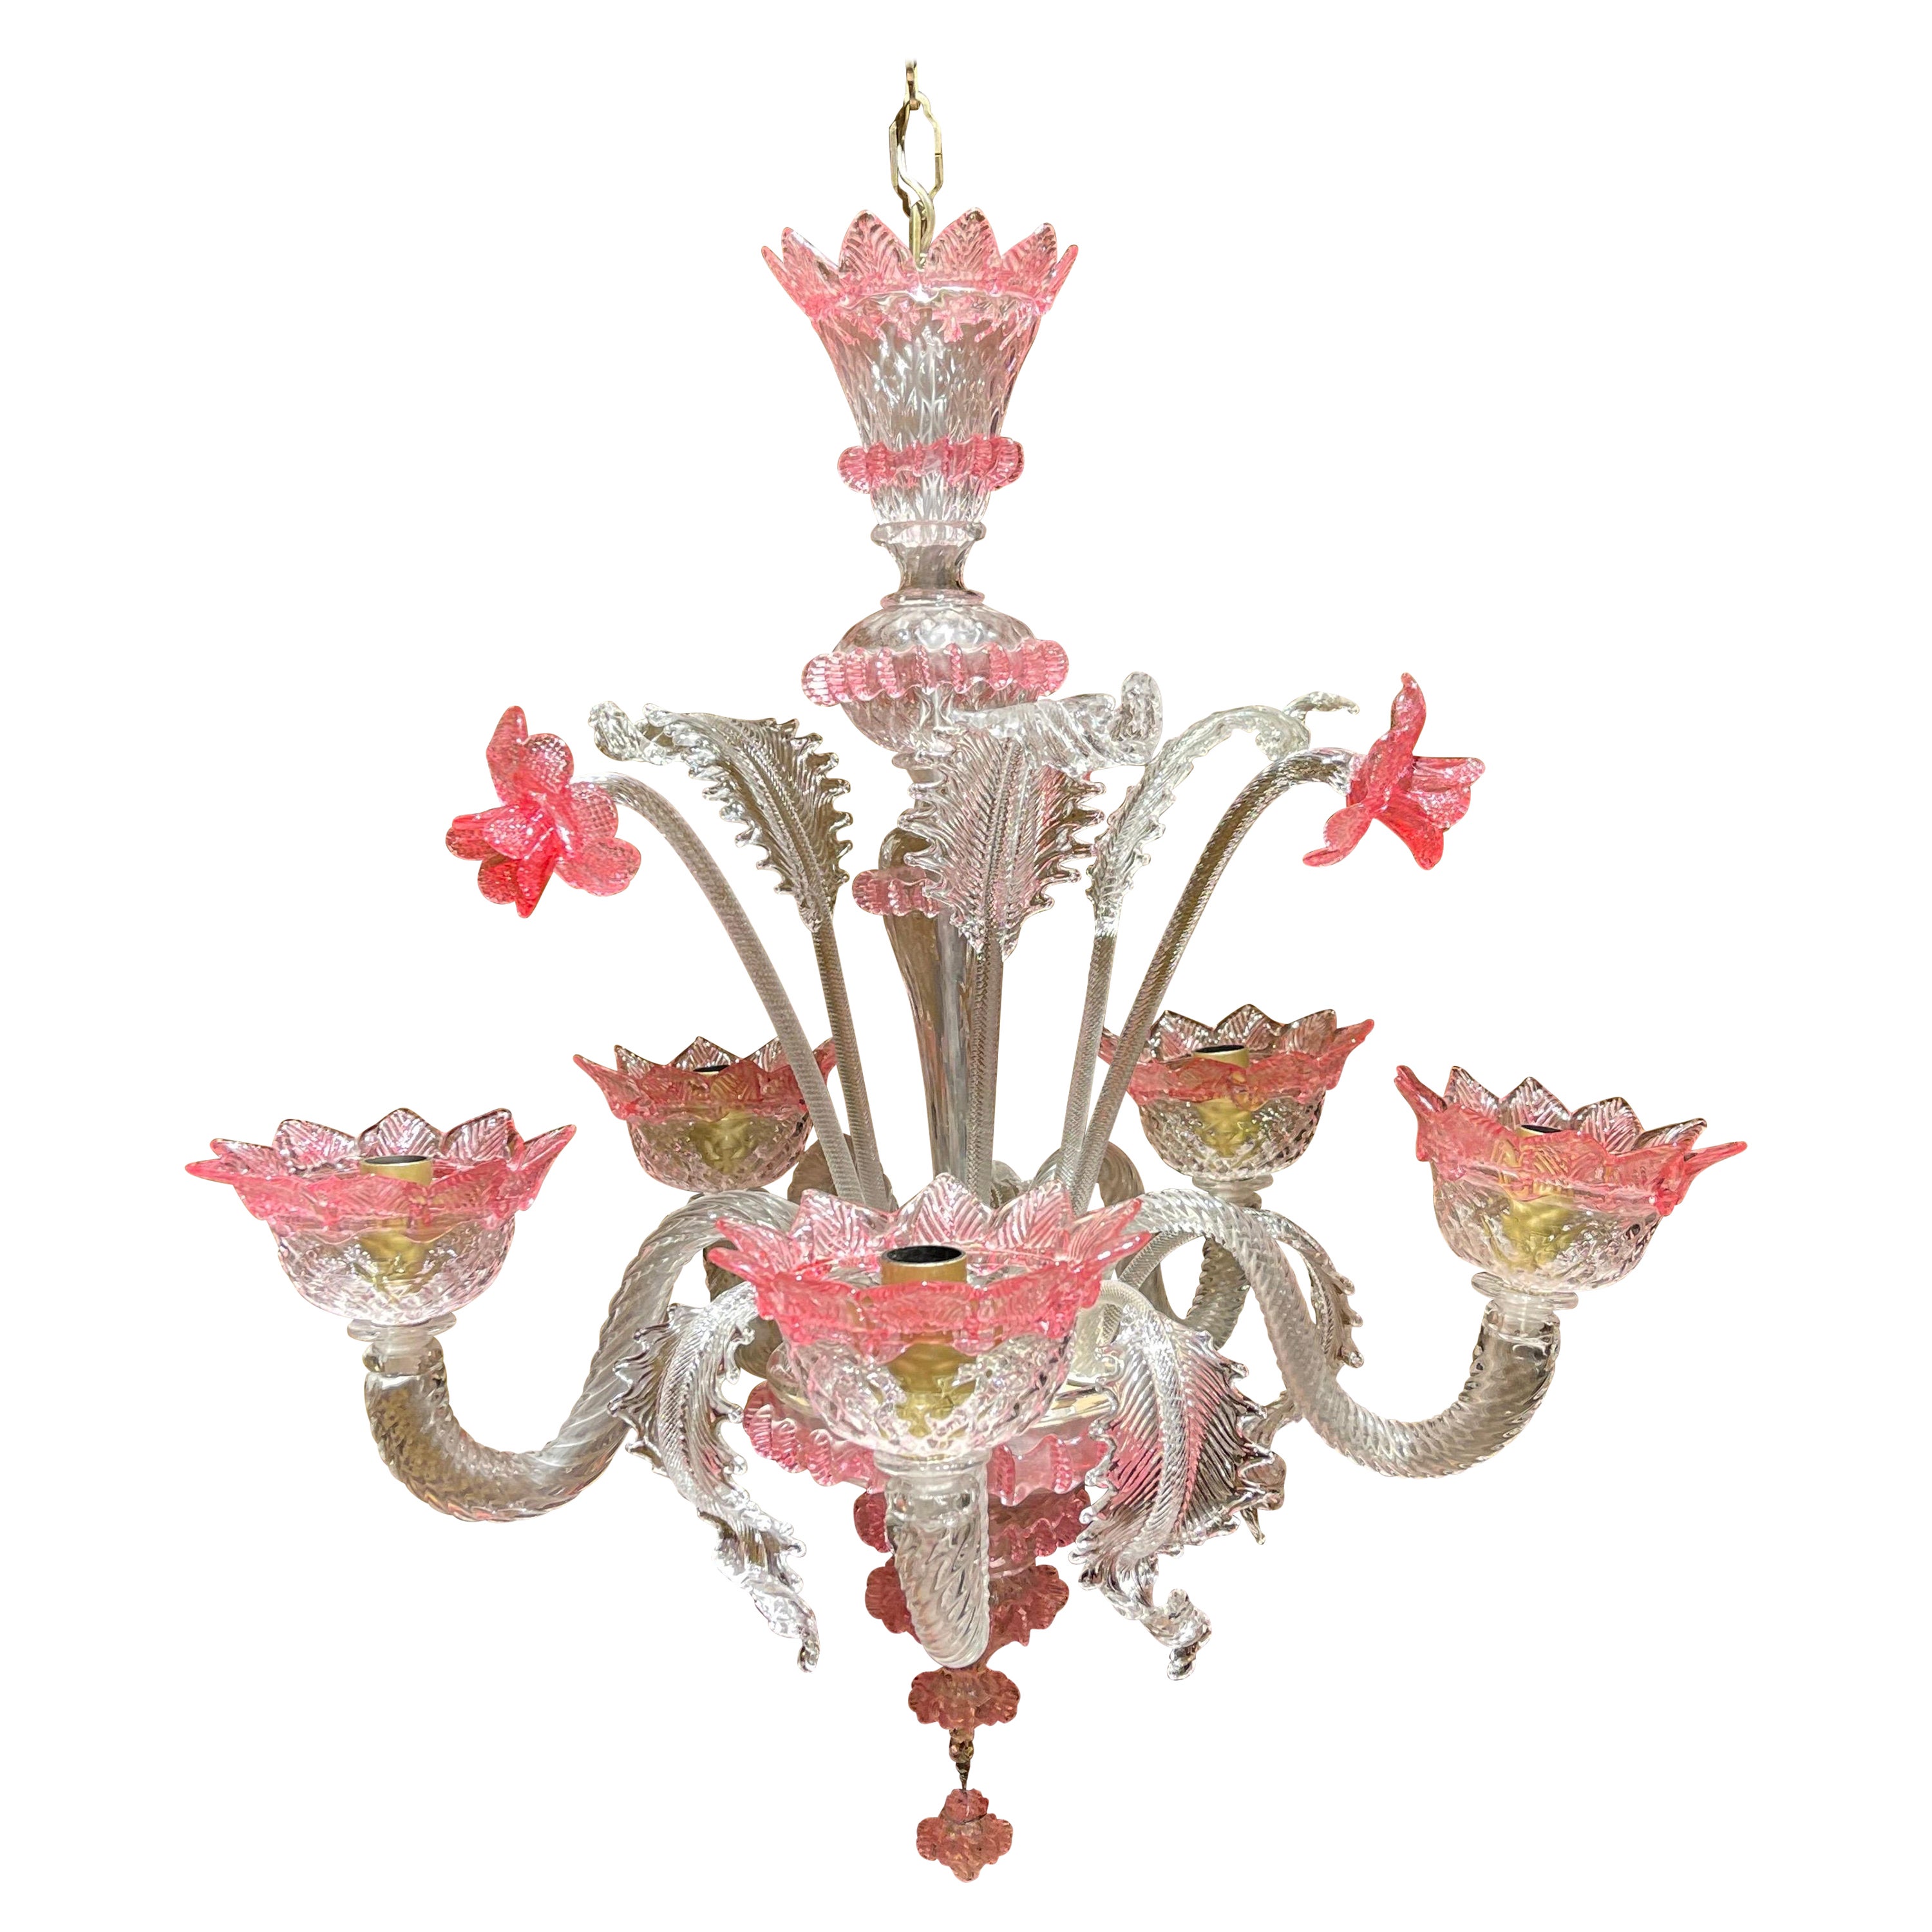 20th Century Murano Italy Chandelier Ceiling Luster, Mouth Blown